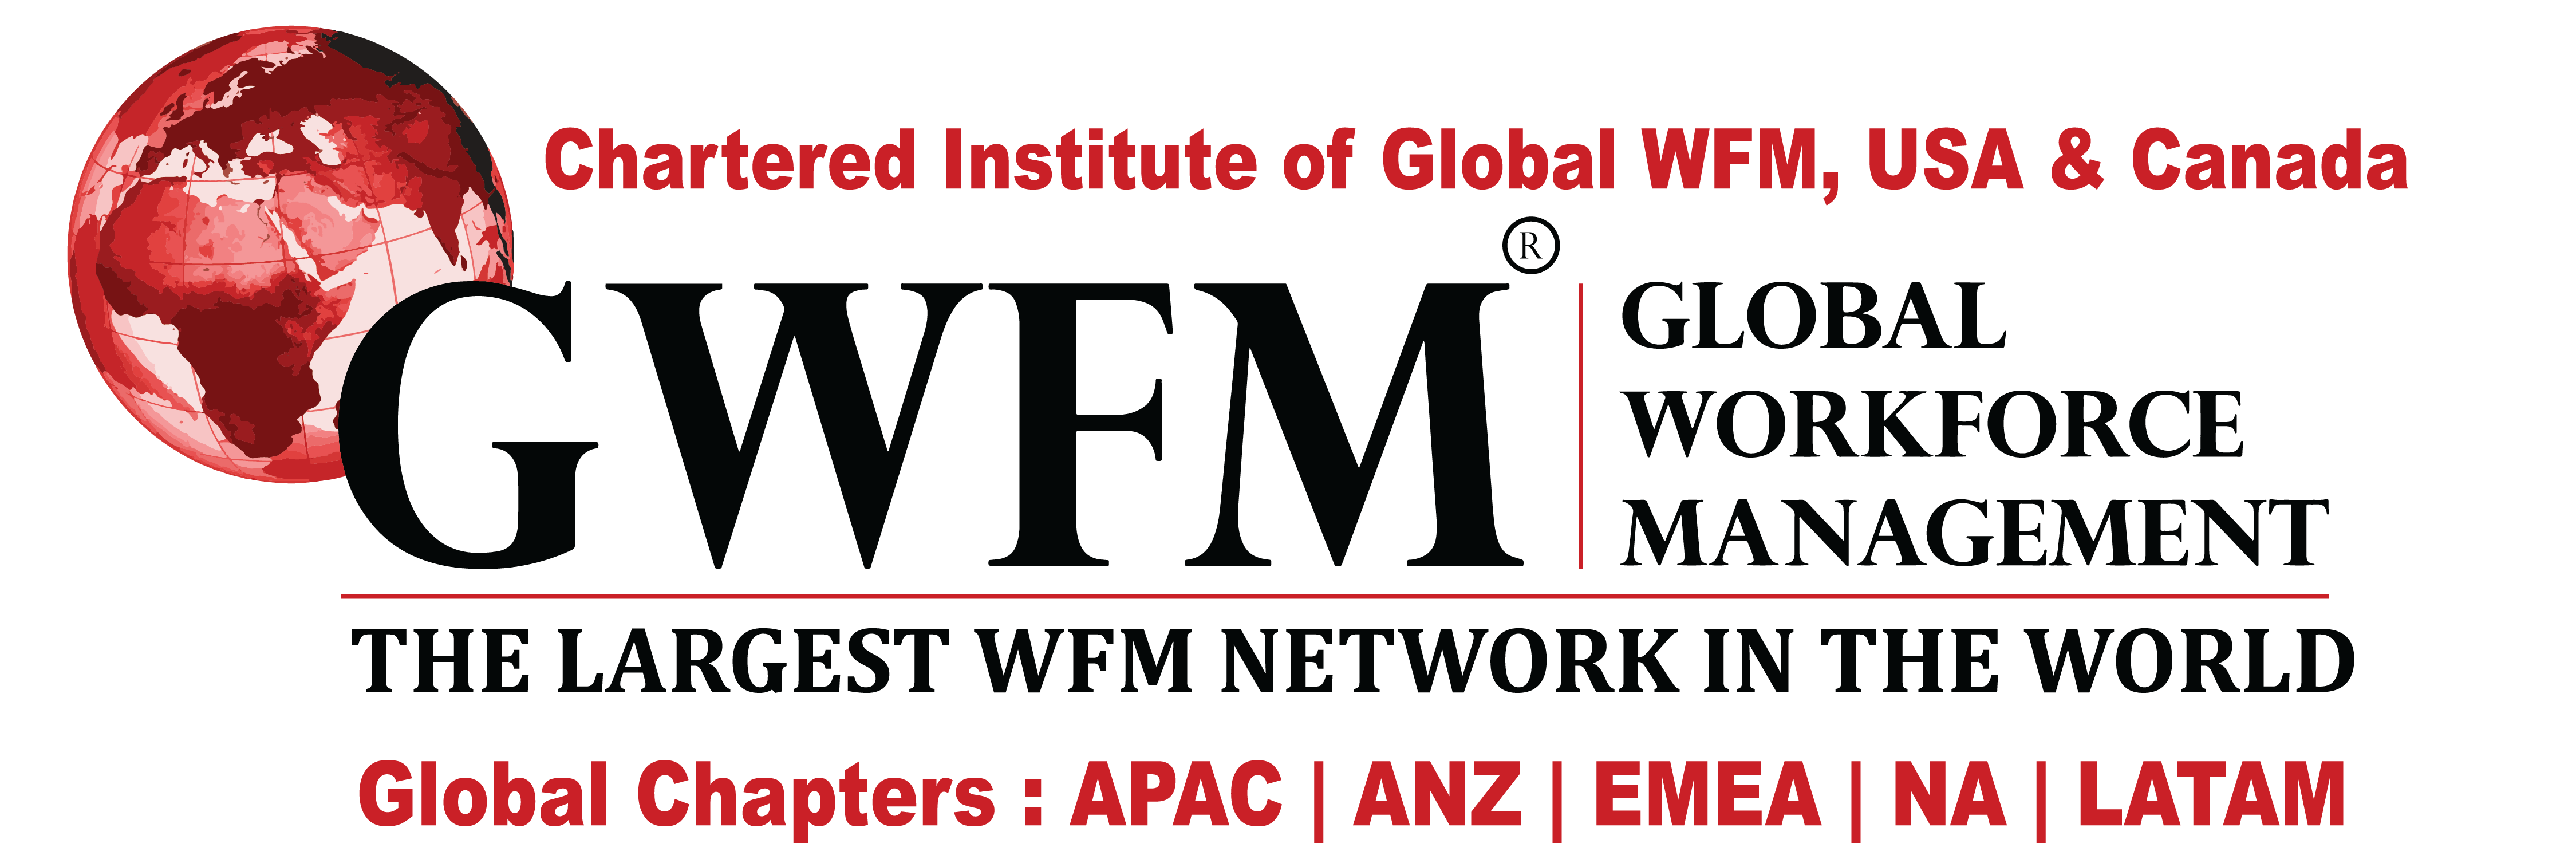 GWFM Events